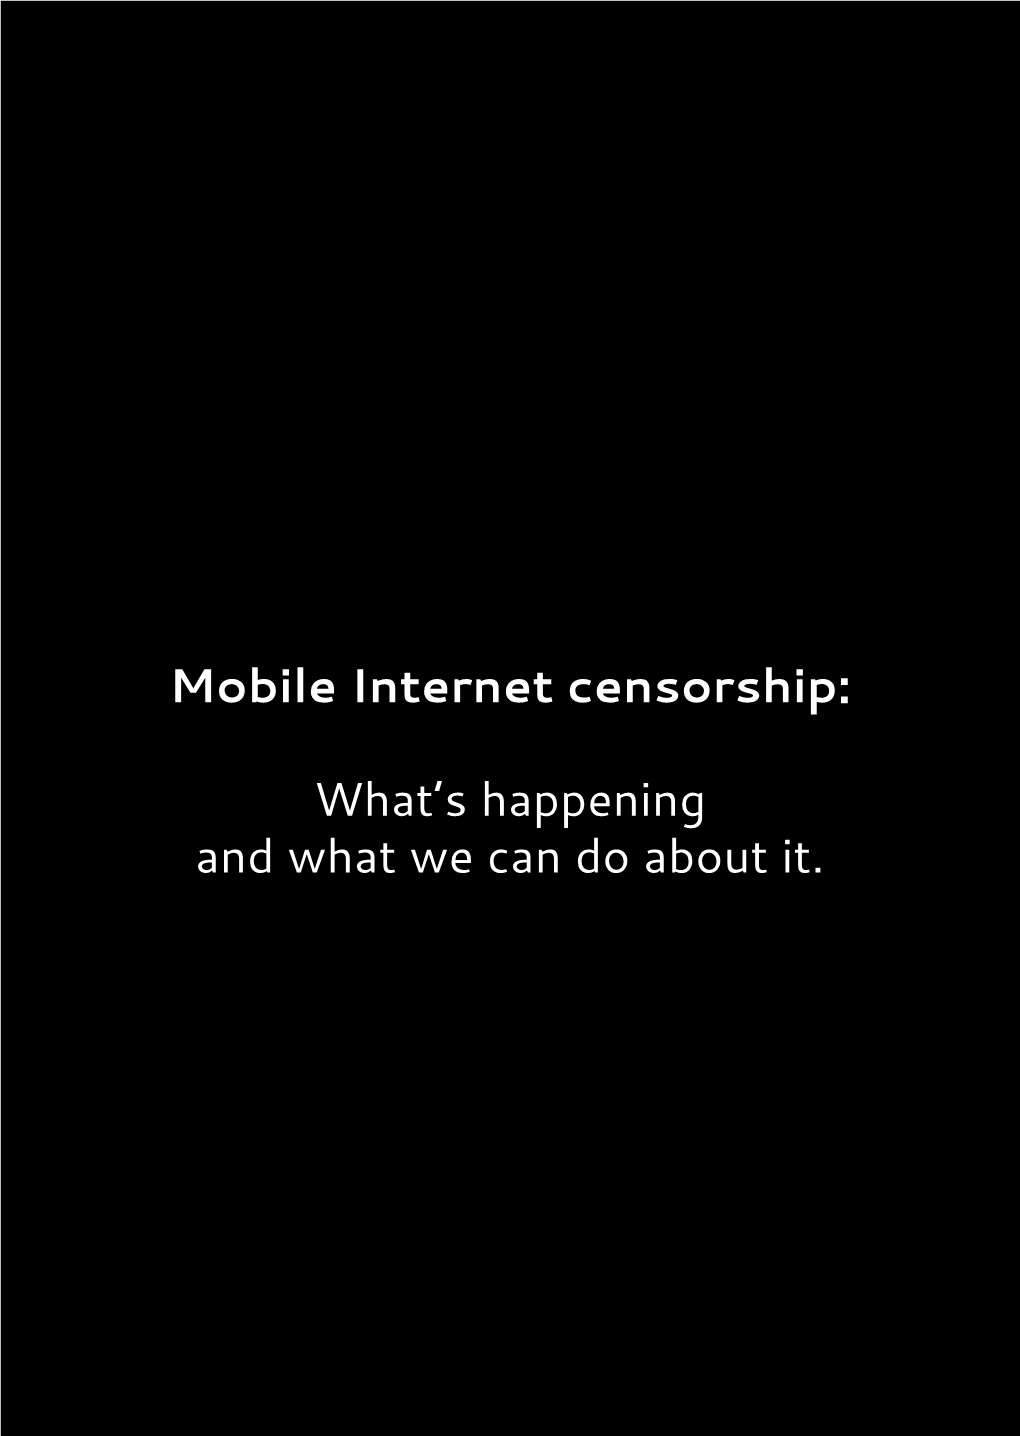 Mobile Censorship: What's Happening and What We Can Do About